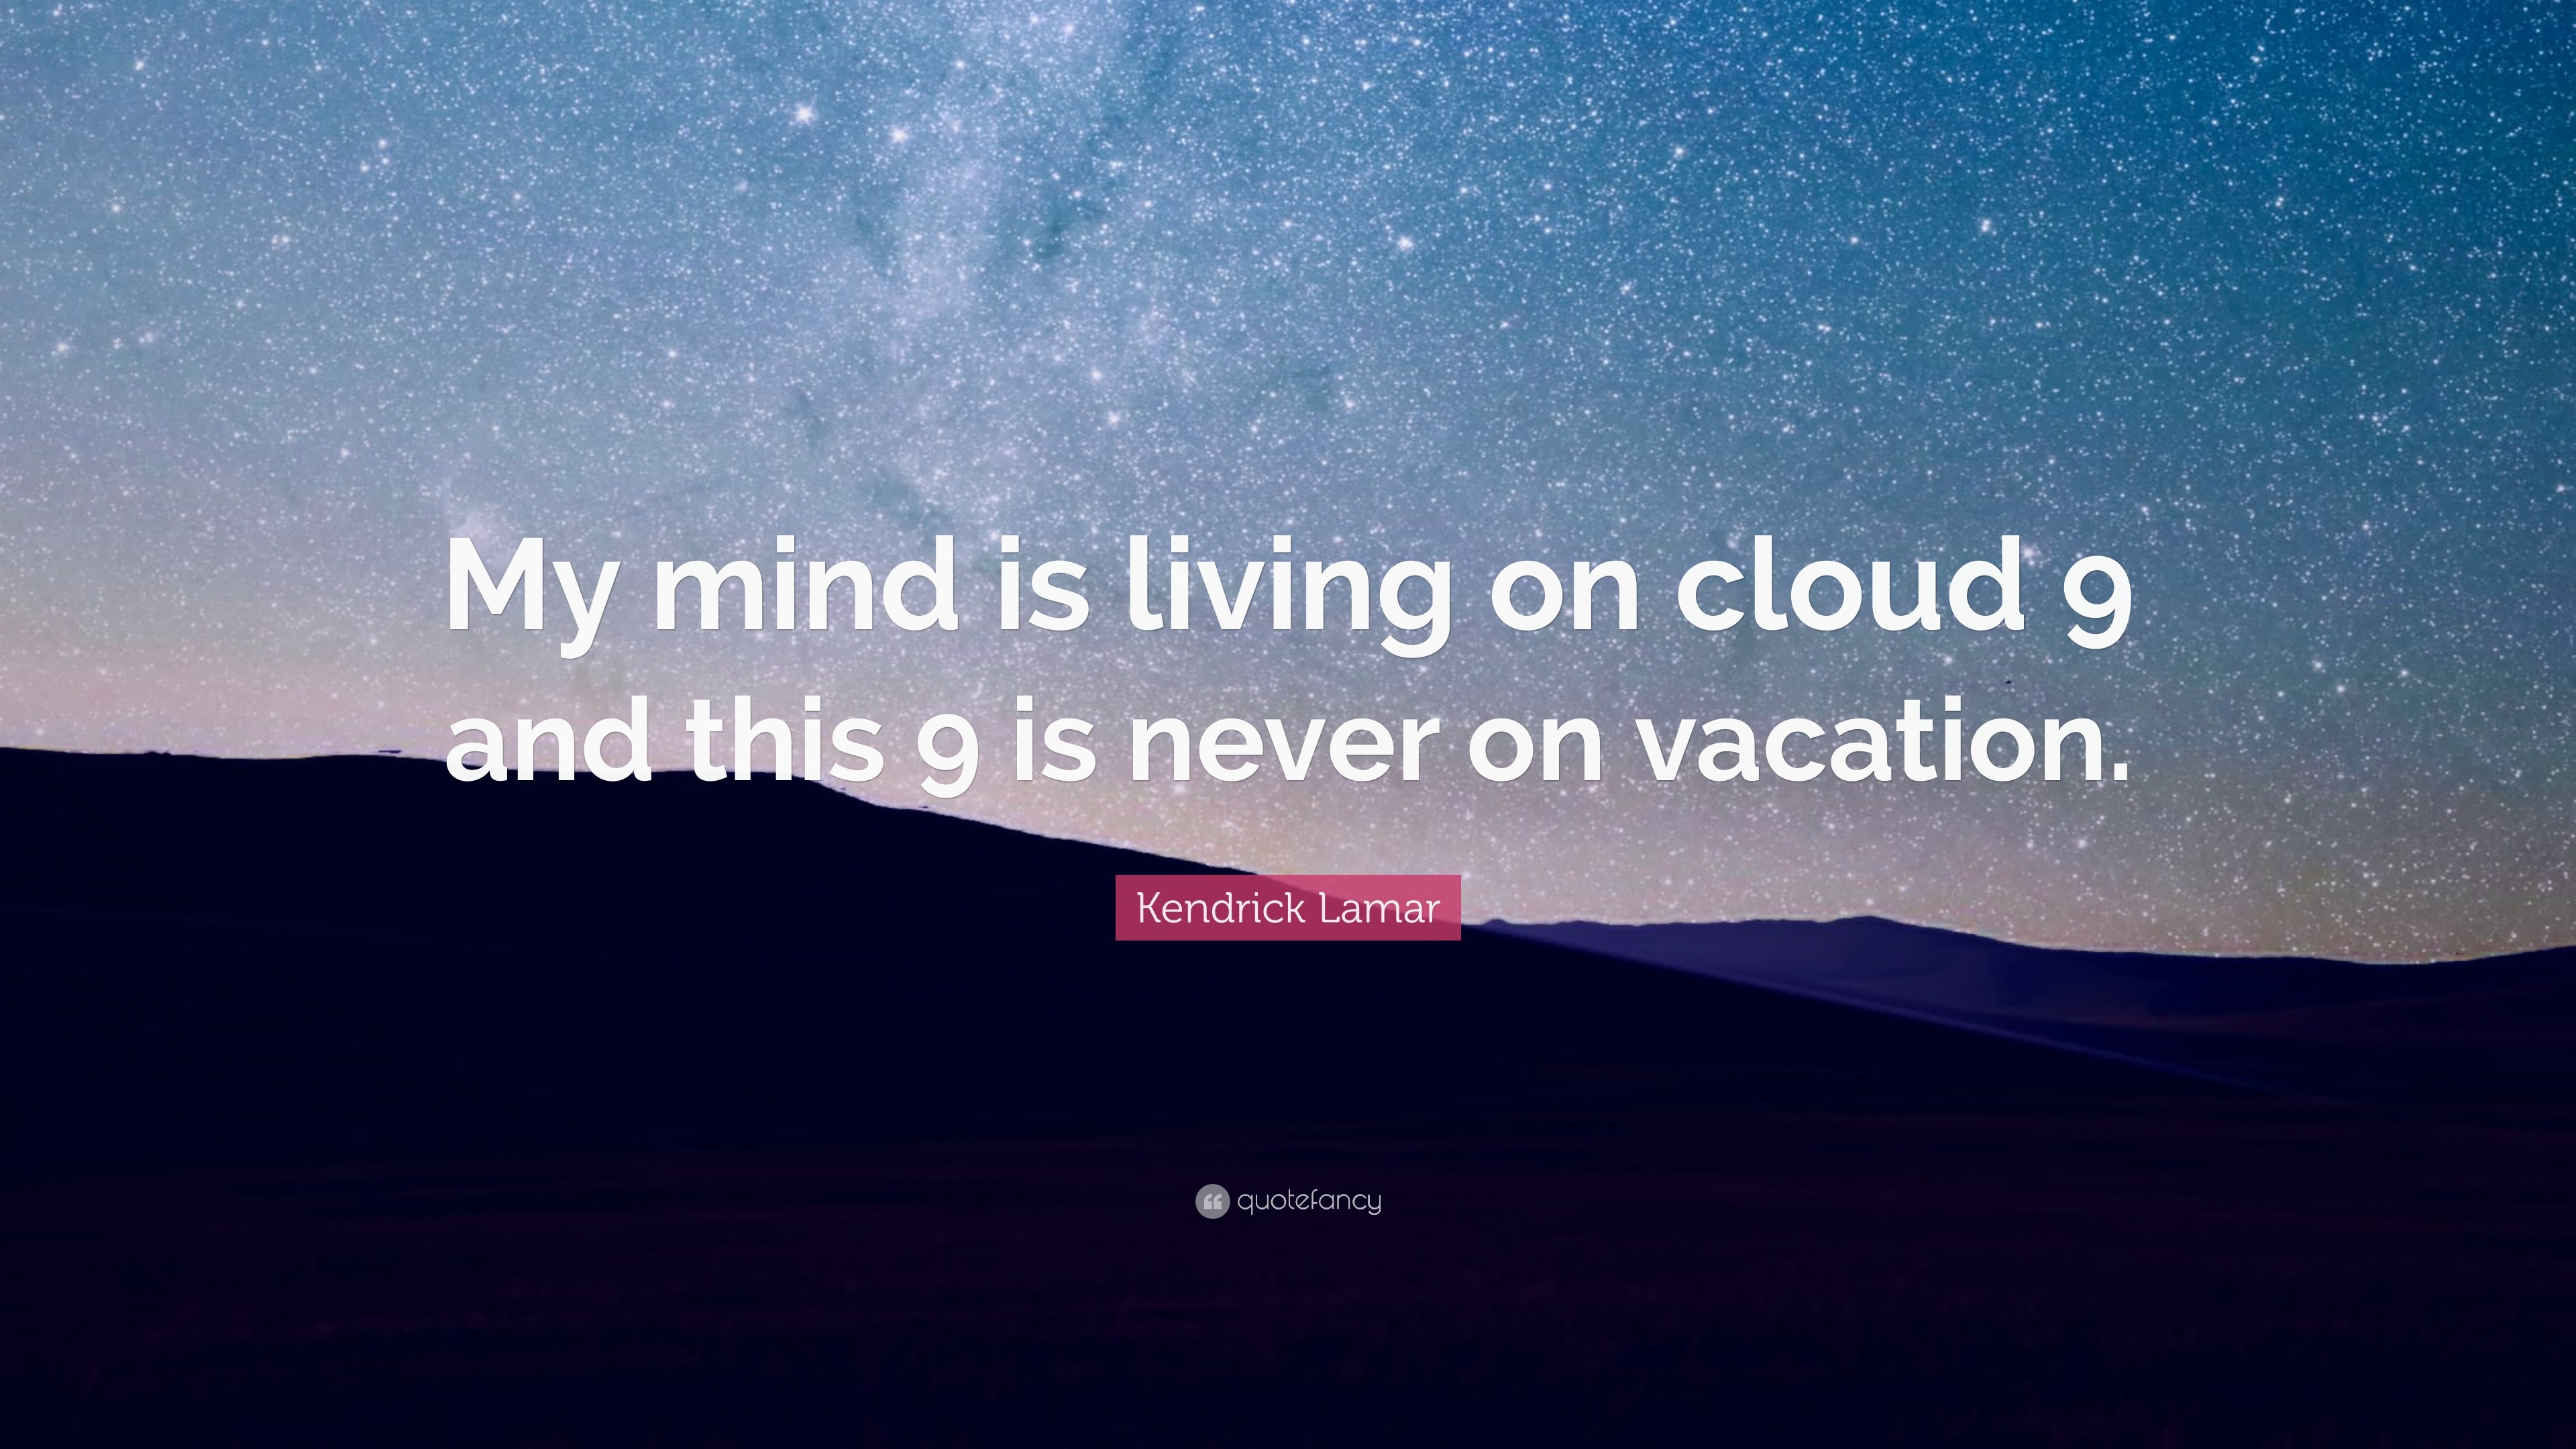 3840x2160 Kendrick Lamar Quote: “My mind is living on cloud 9 and this 9 is